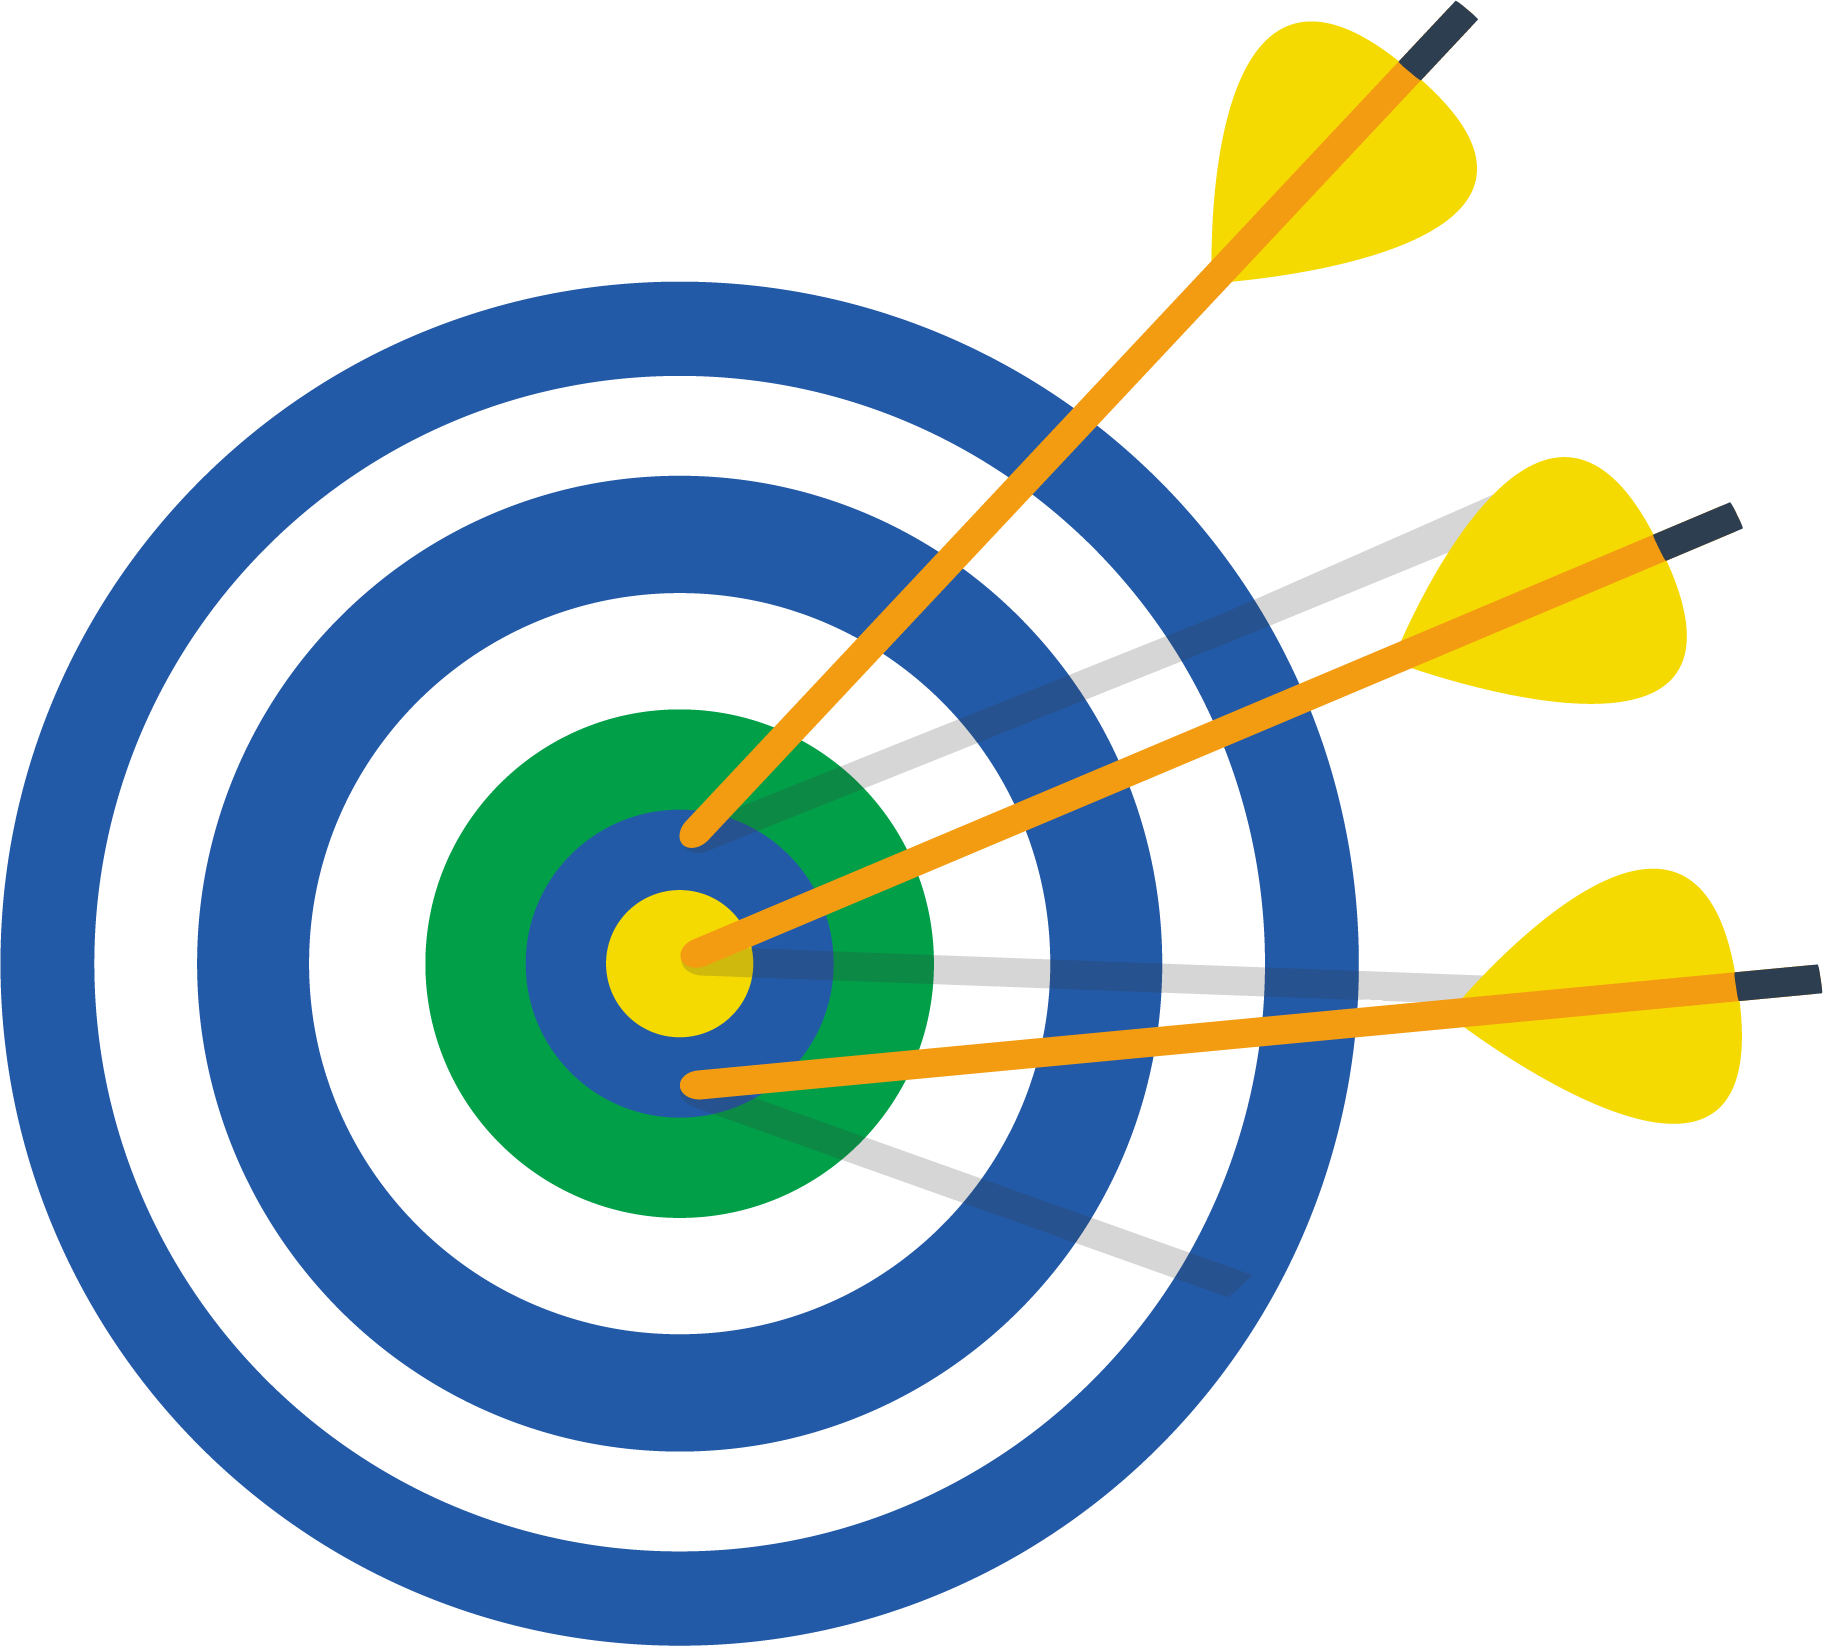 A target is used to illustrate high accuracy by showing 3 arrows with yellow flags that are very close to the bullseye on the blue, white and green target.